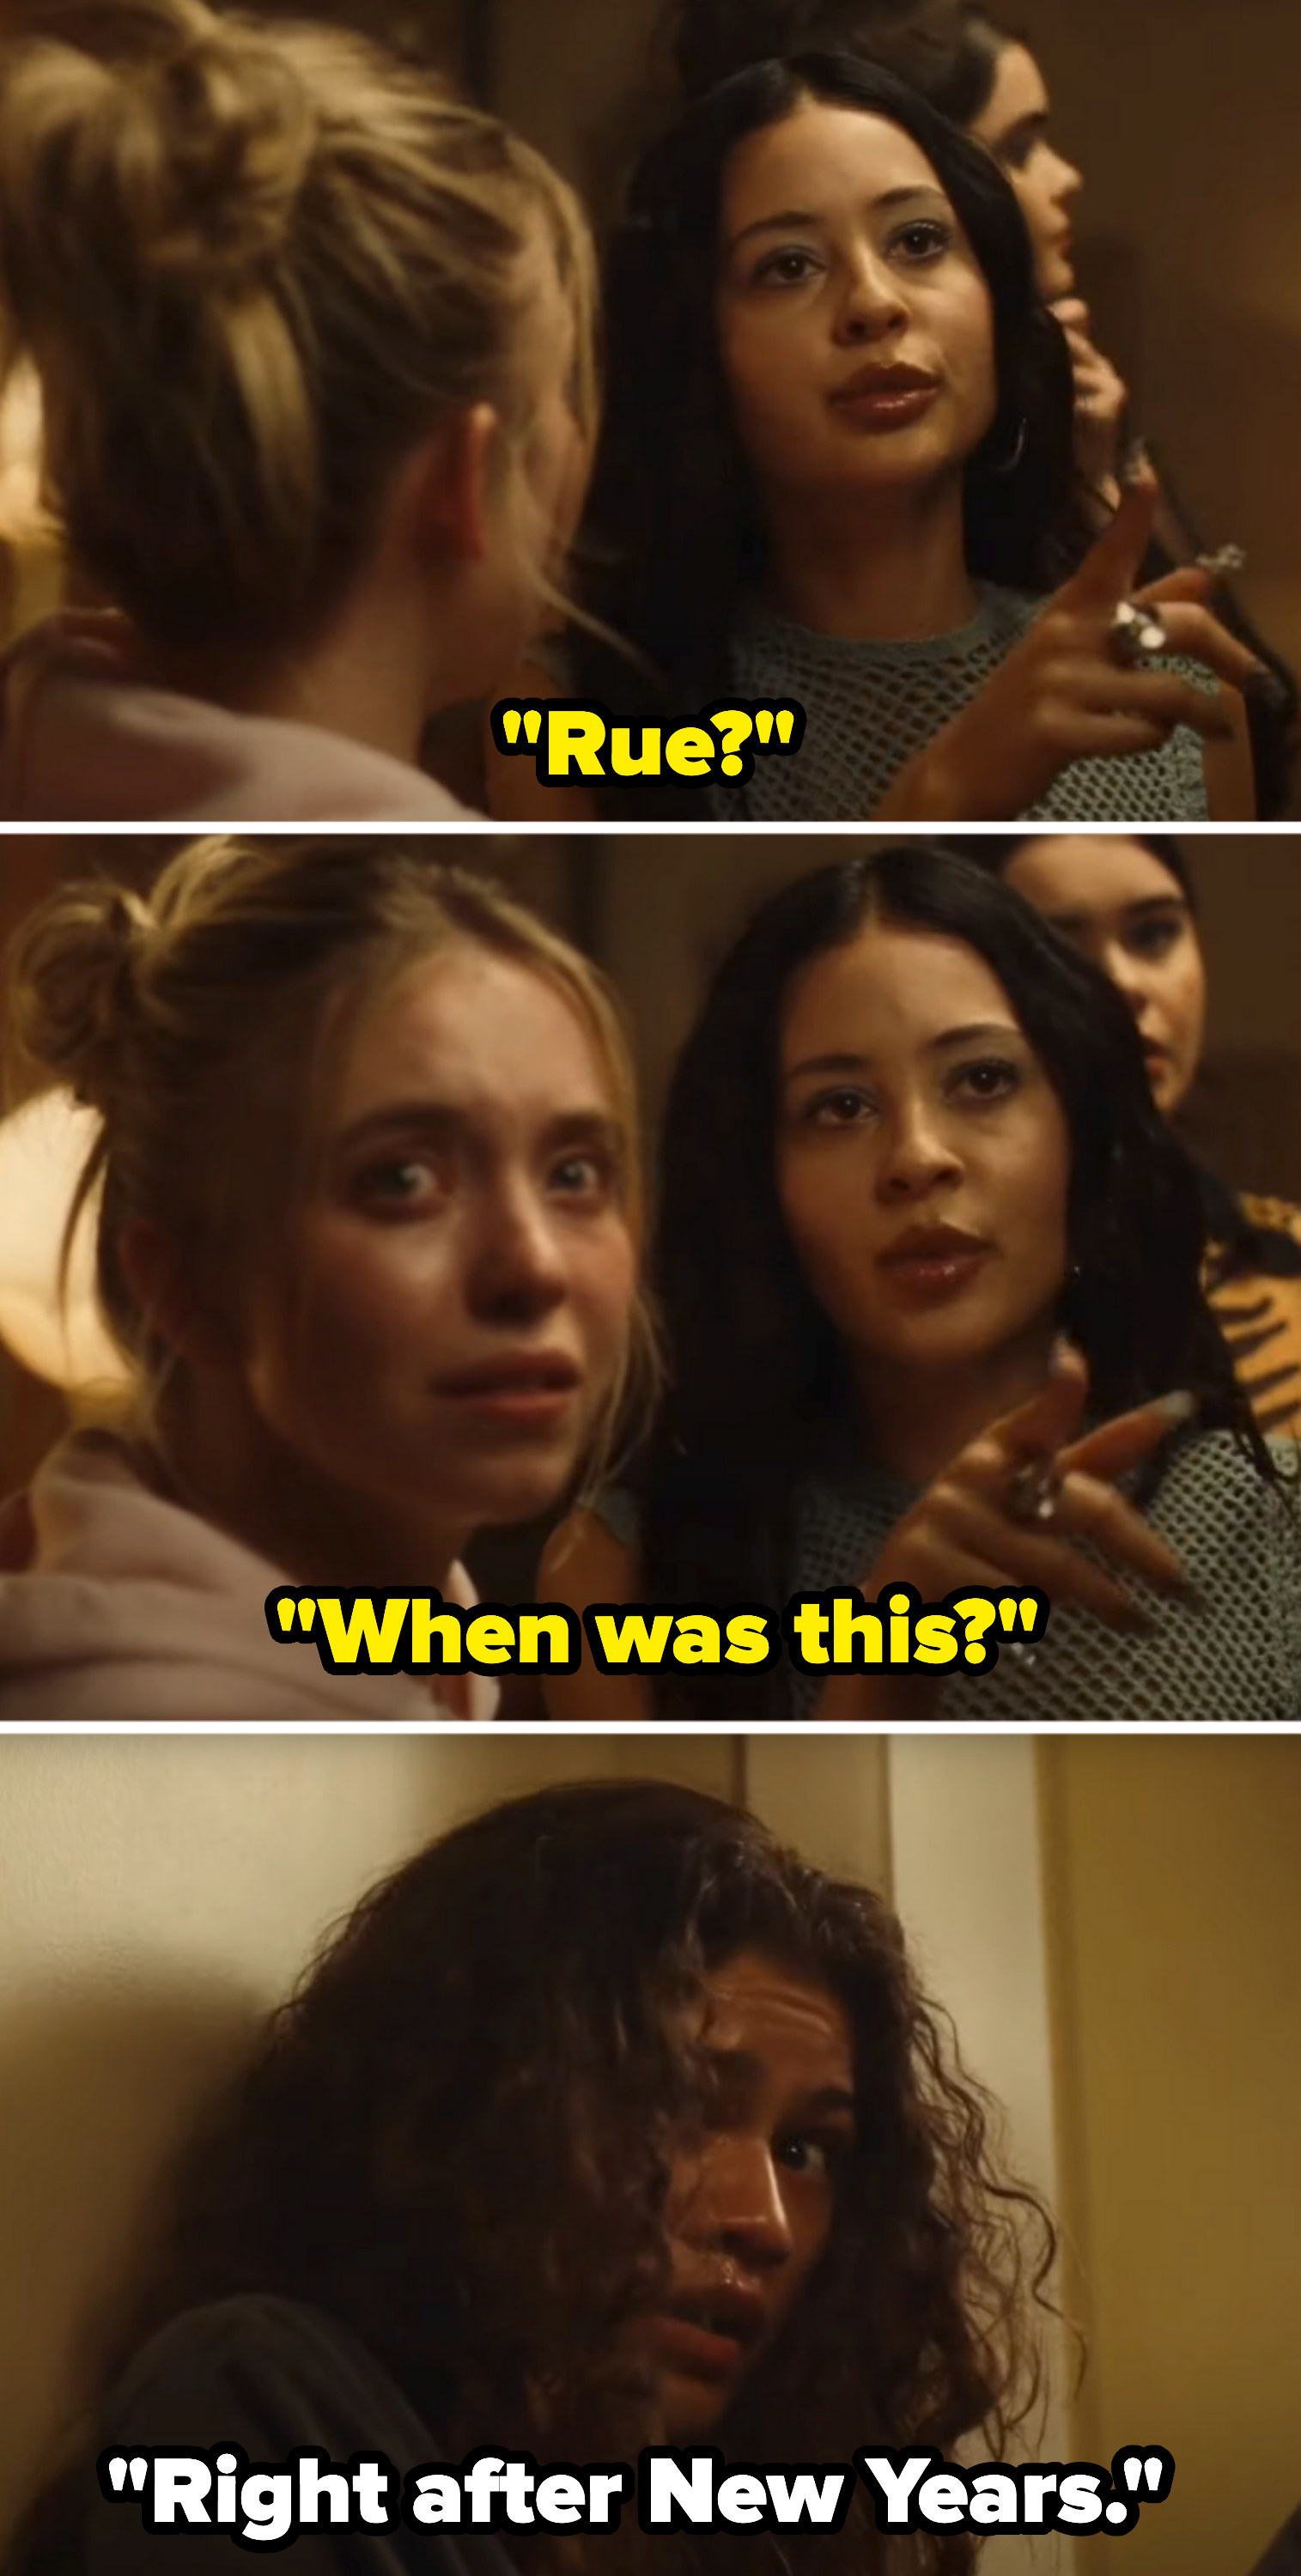 Maddy asks, &quot;Rue, when was this?&quot;